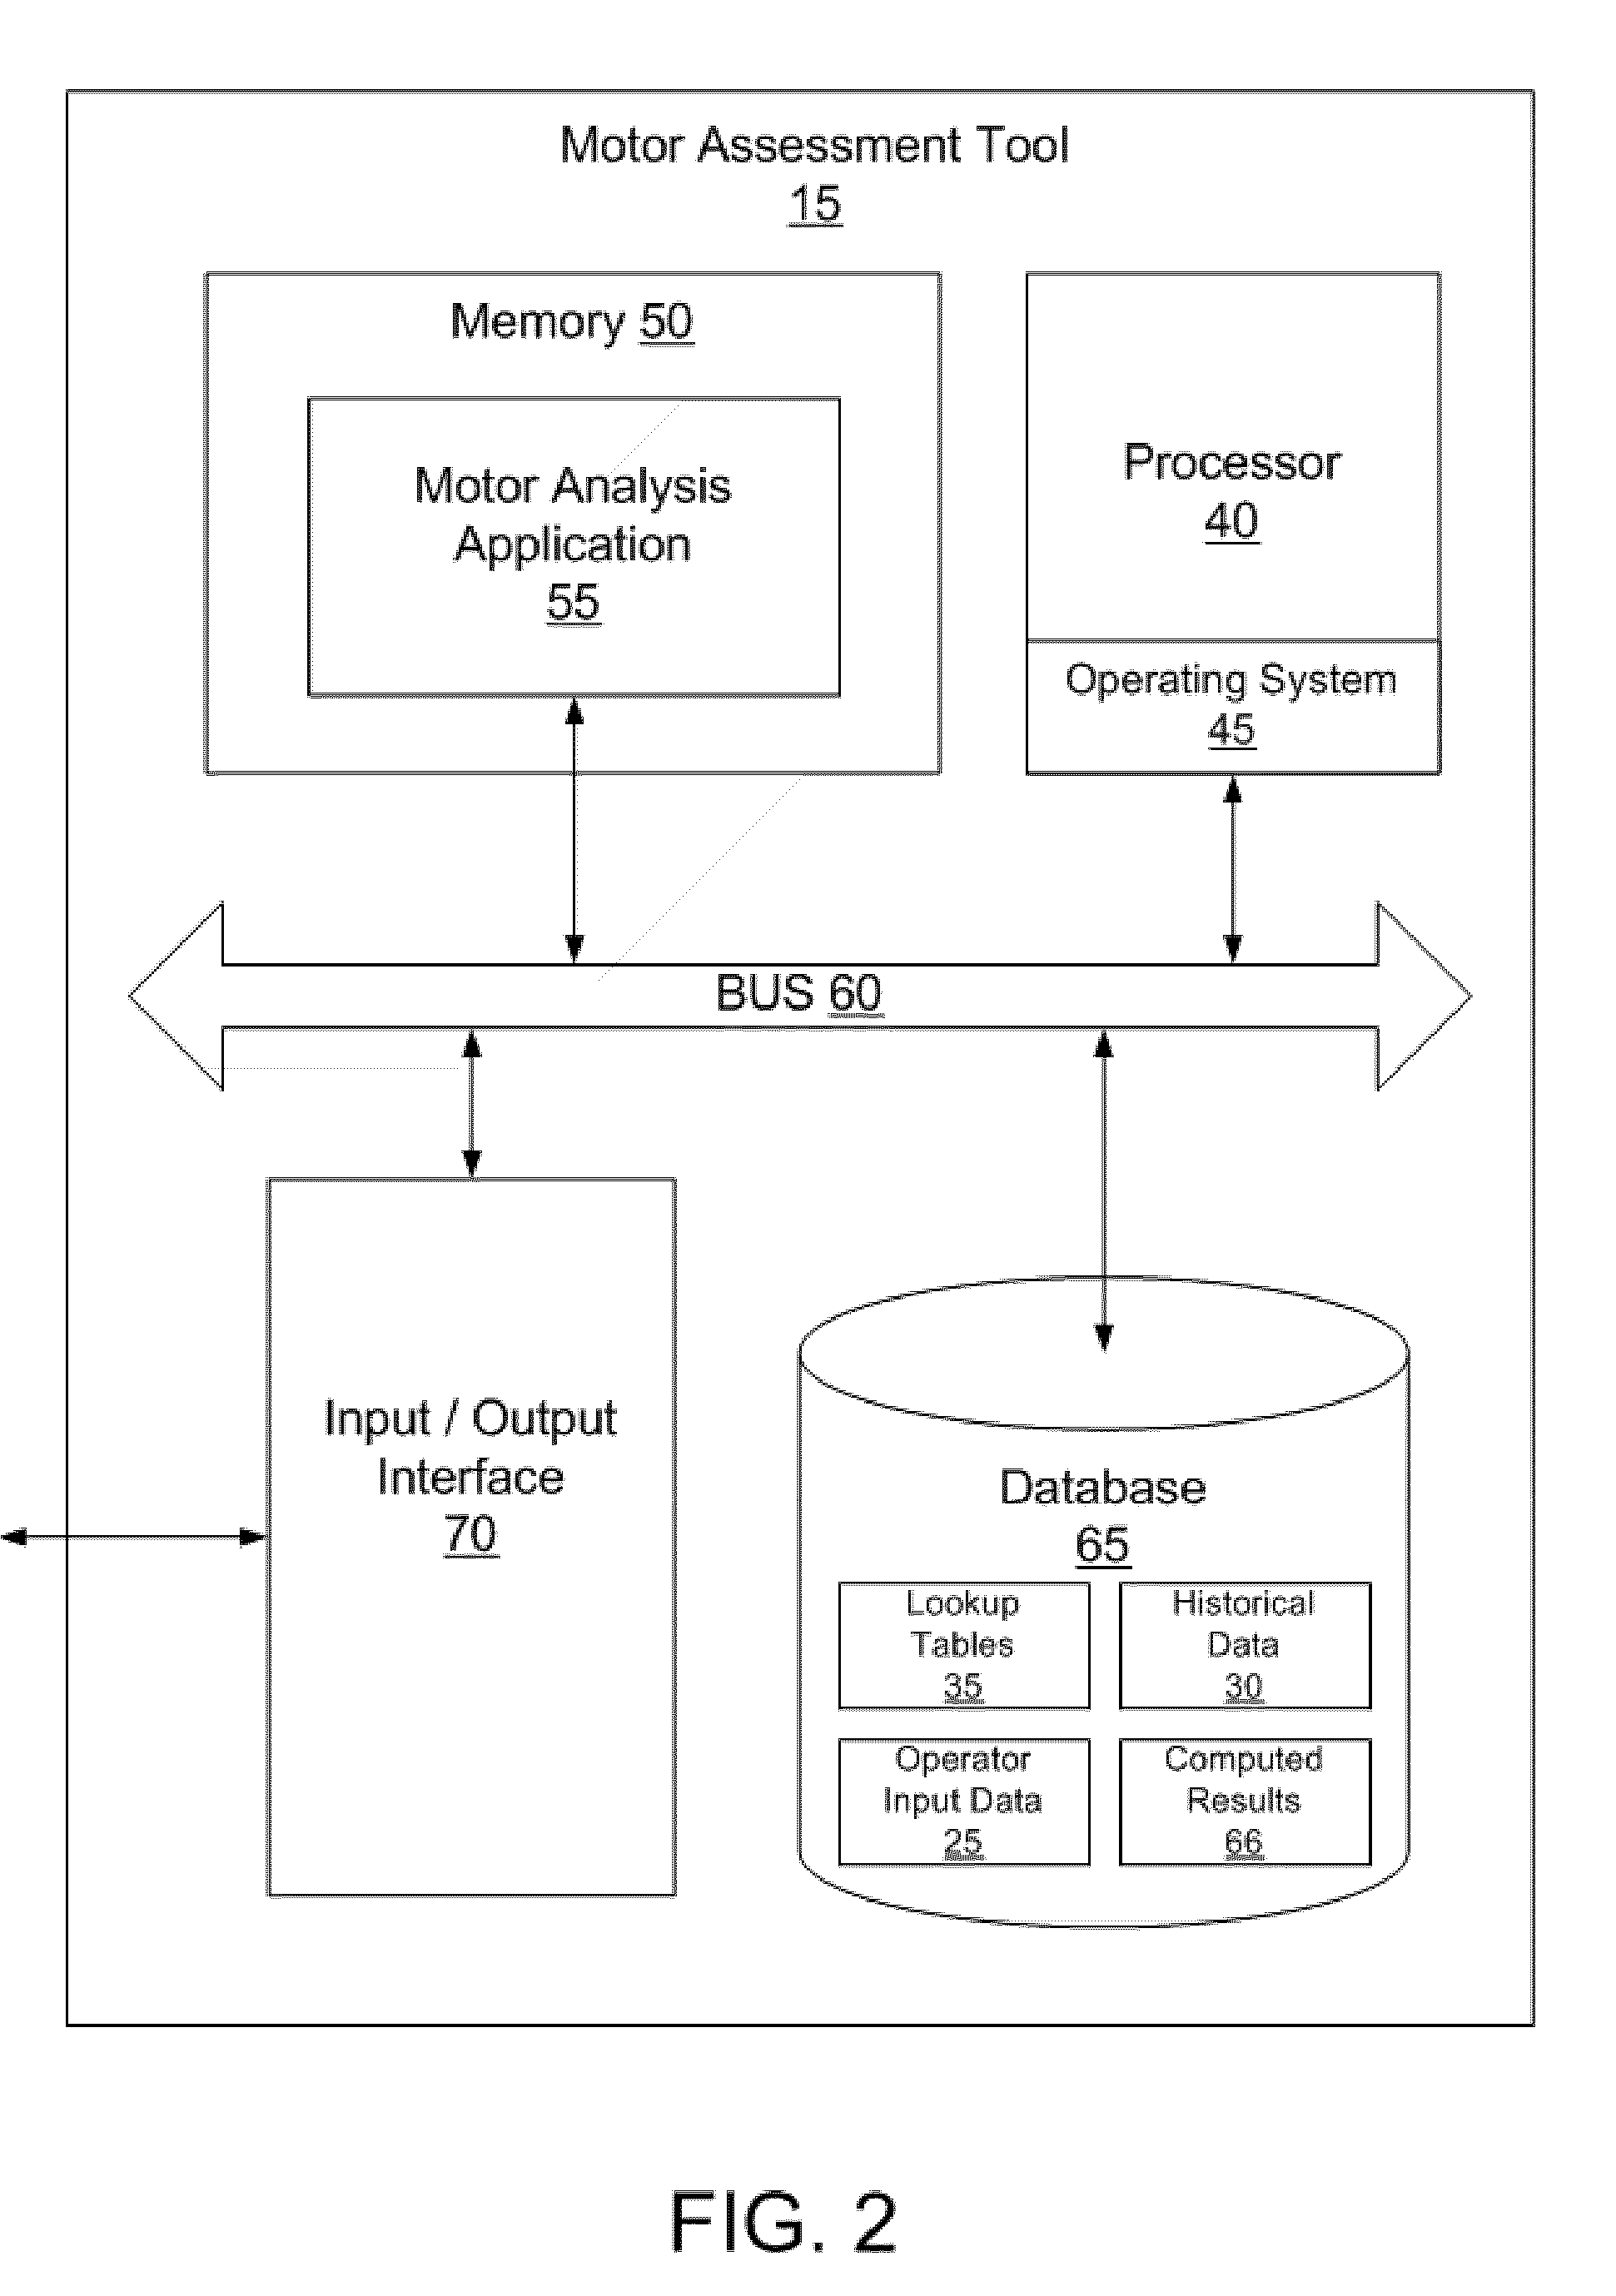 Systems, methods and computer program products for assessing the health of an electric motor